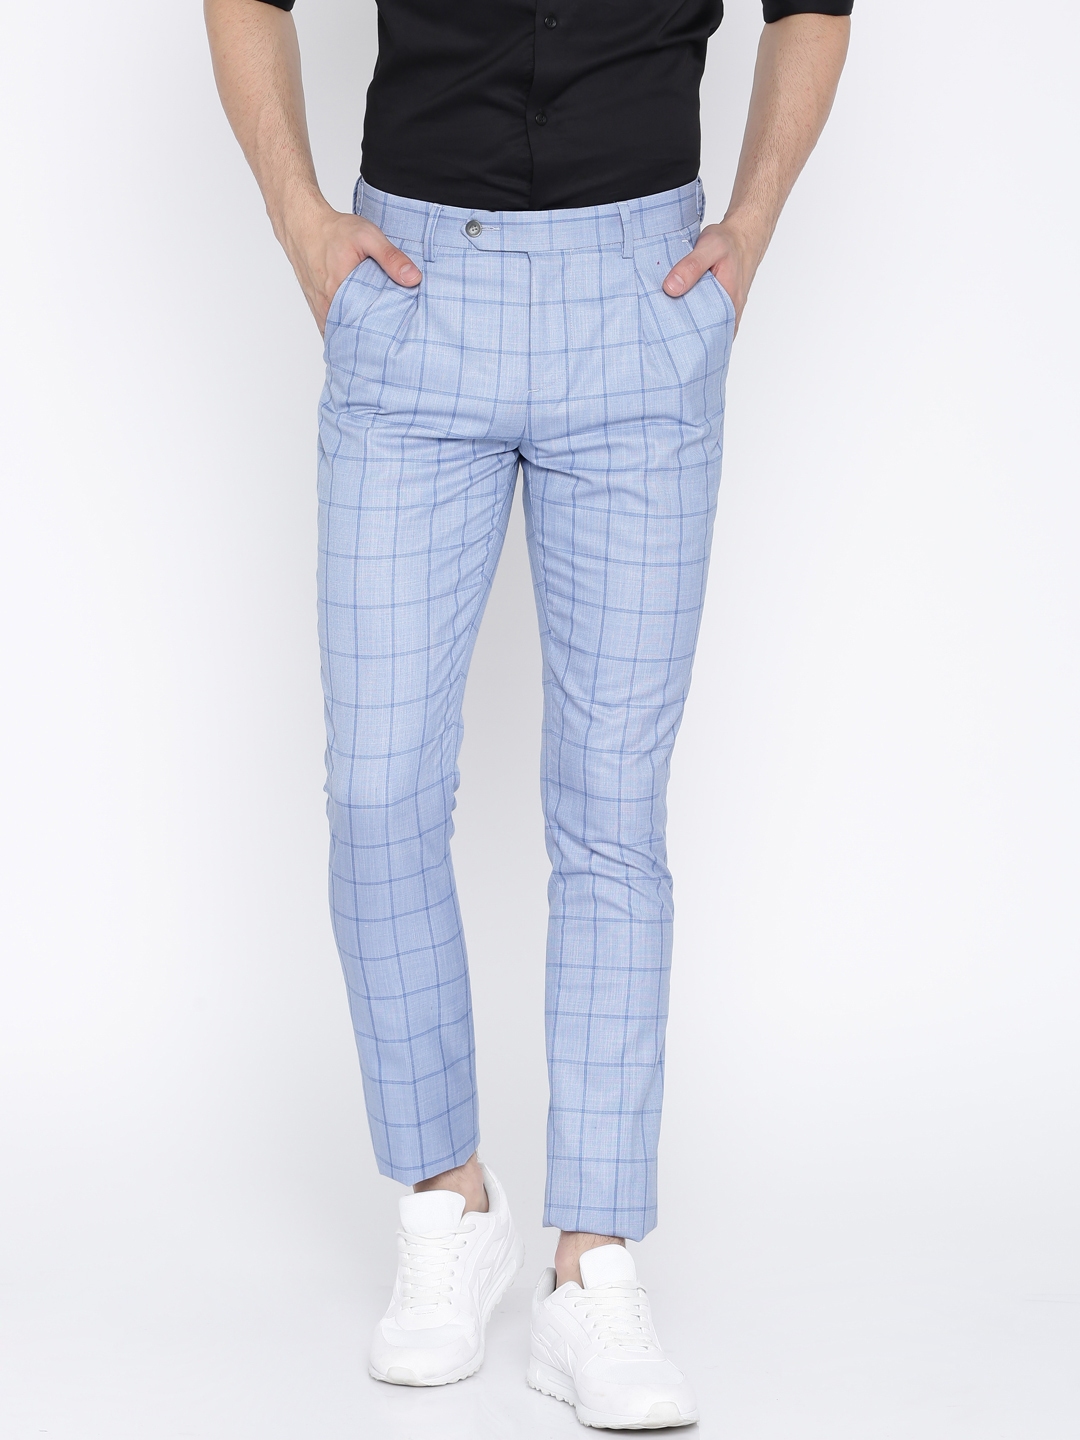 Buy INVICTUS Men Blue Slim Fit Checked Smart Casual Trousers Trousers   Trousers for Men 2029950  Myntra